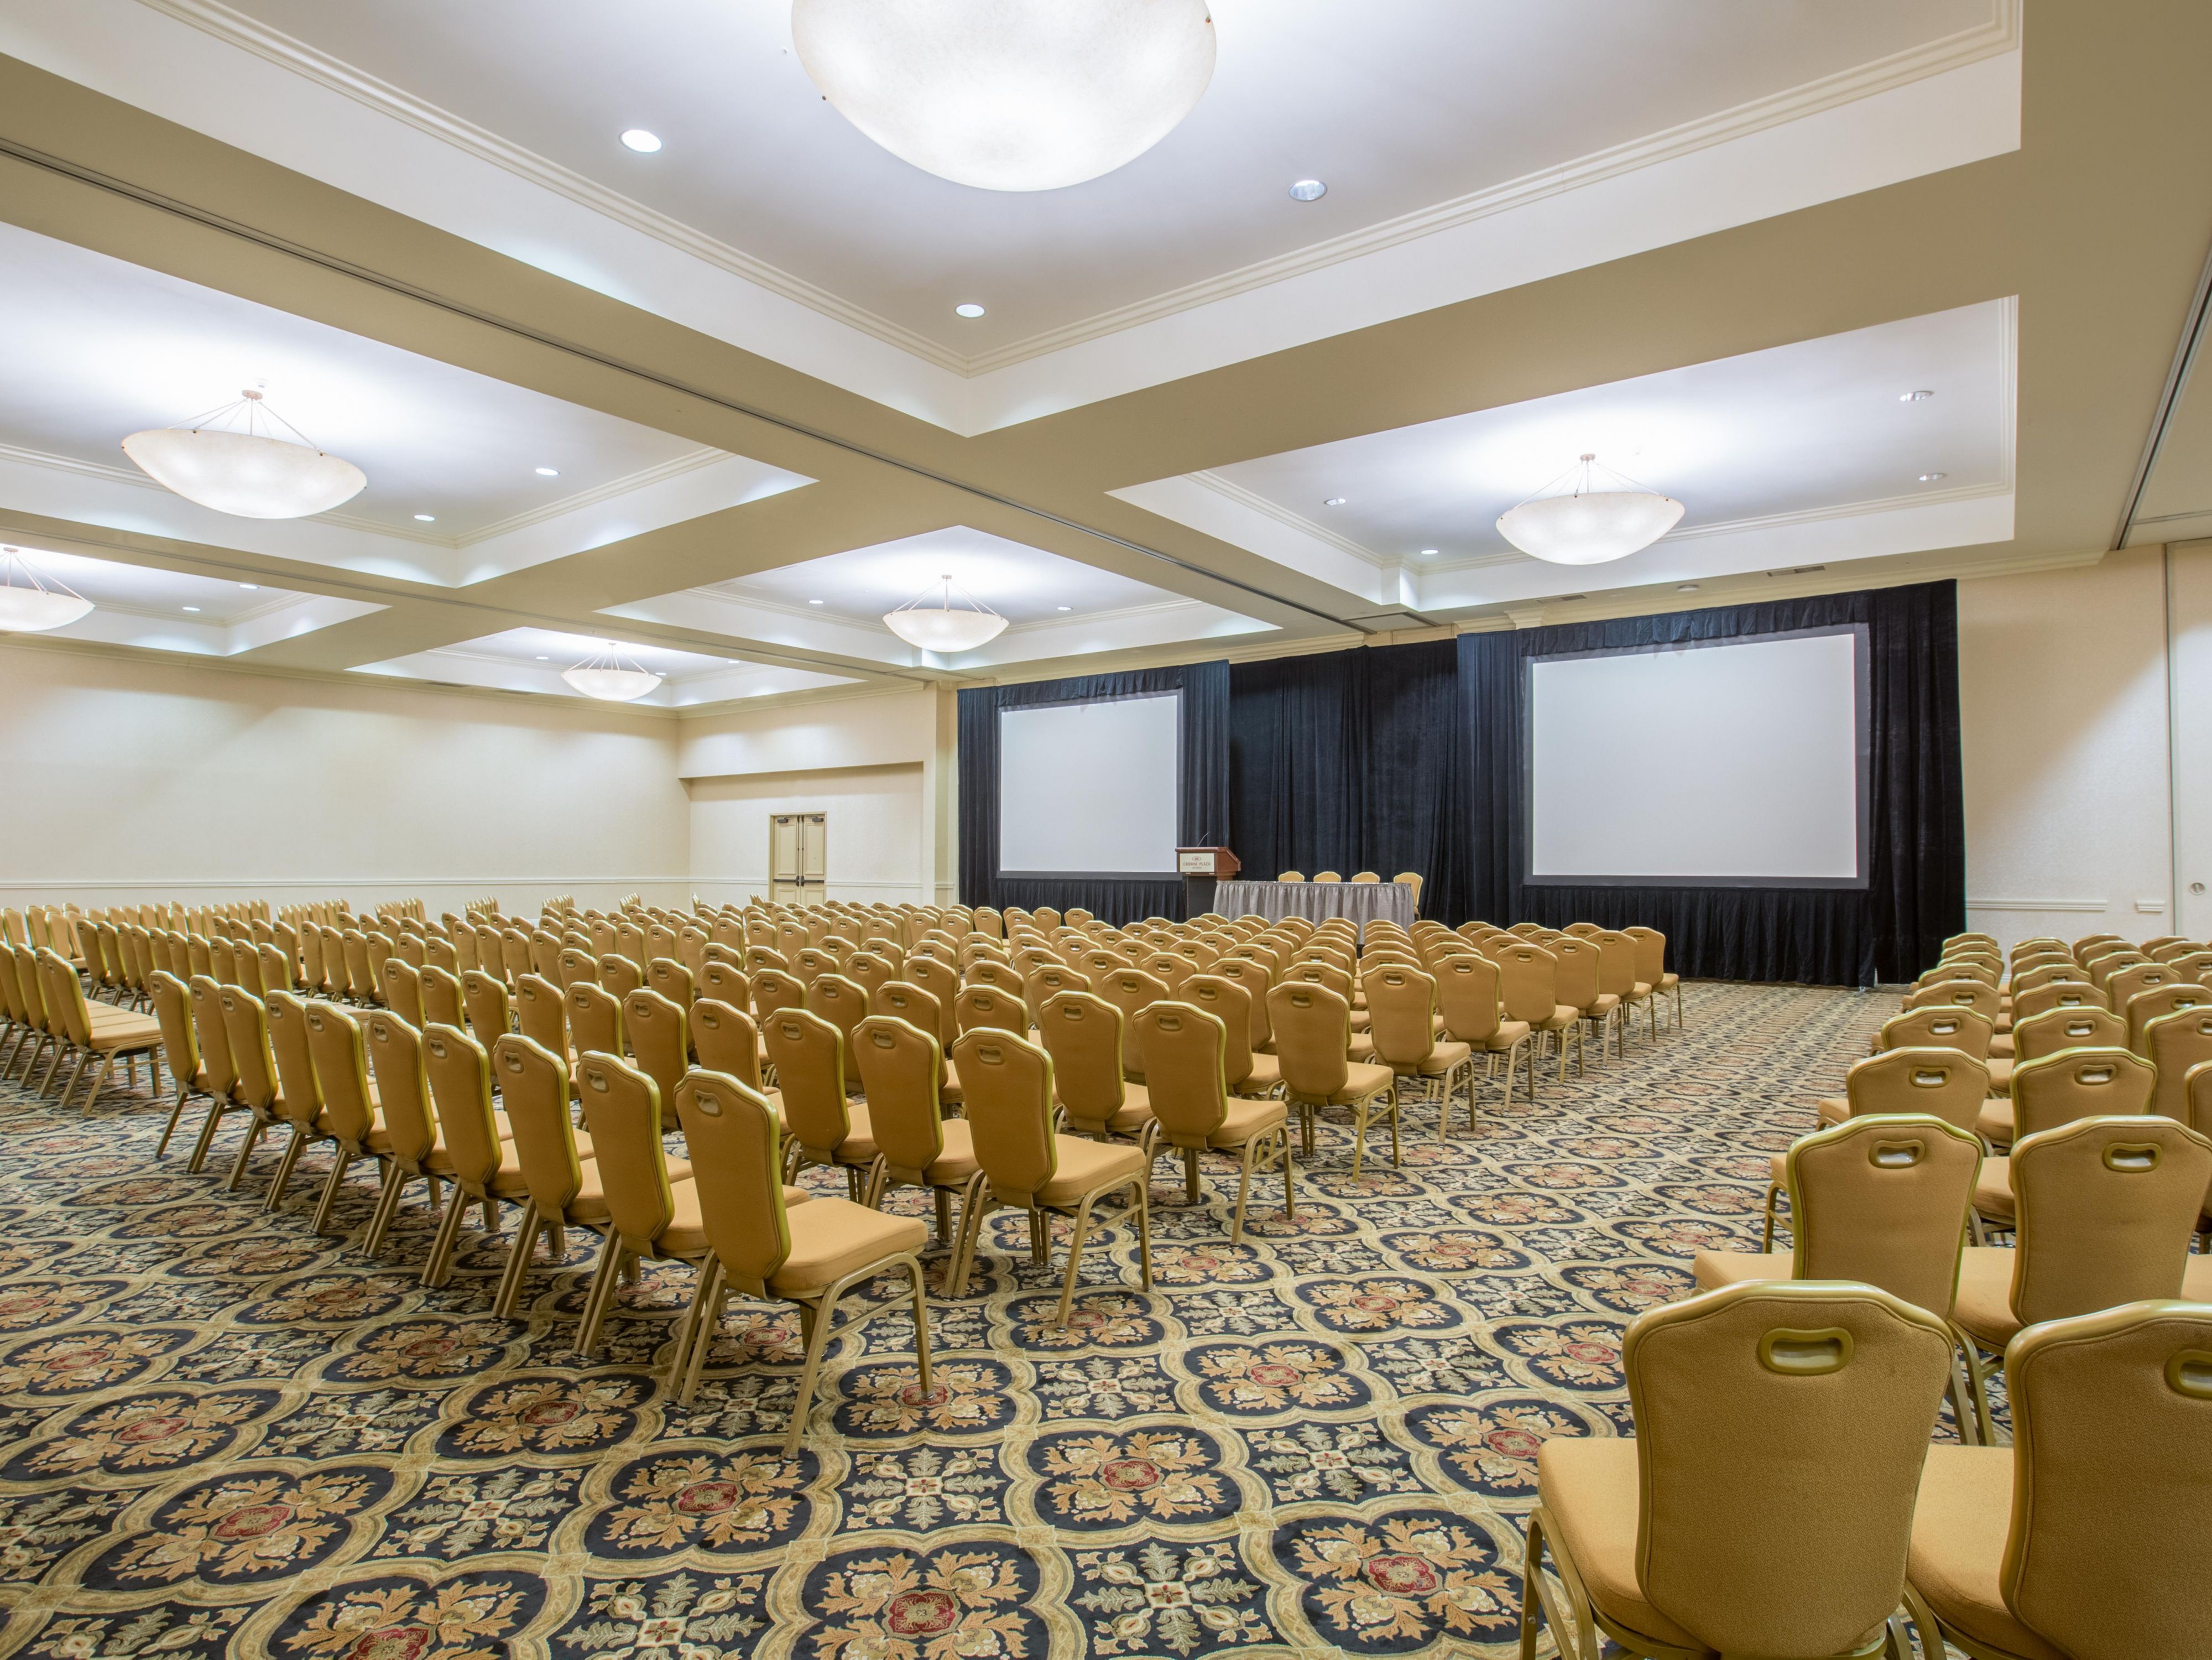 Crowne Plaza San Diego can accommodate anything from small meetings to large conferences. Meeting space includes 30,000 square feet of flexible space and adaptable lighting options. Our professional staff and Crowne Meetings Director will ensure your function is successful and memorable.